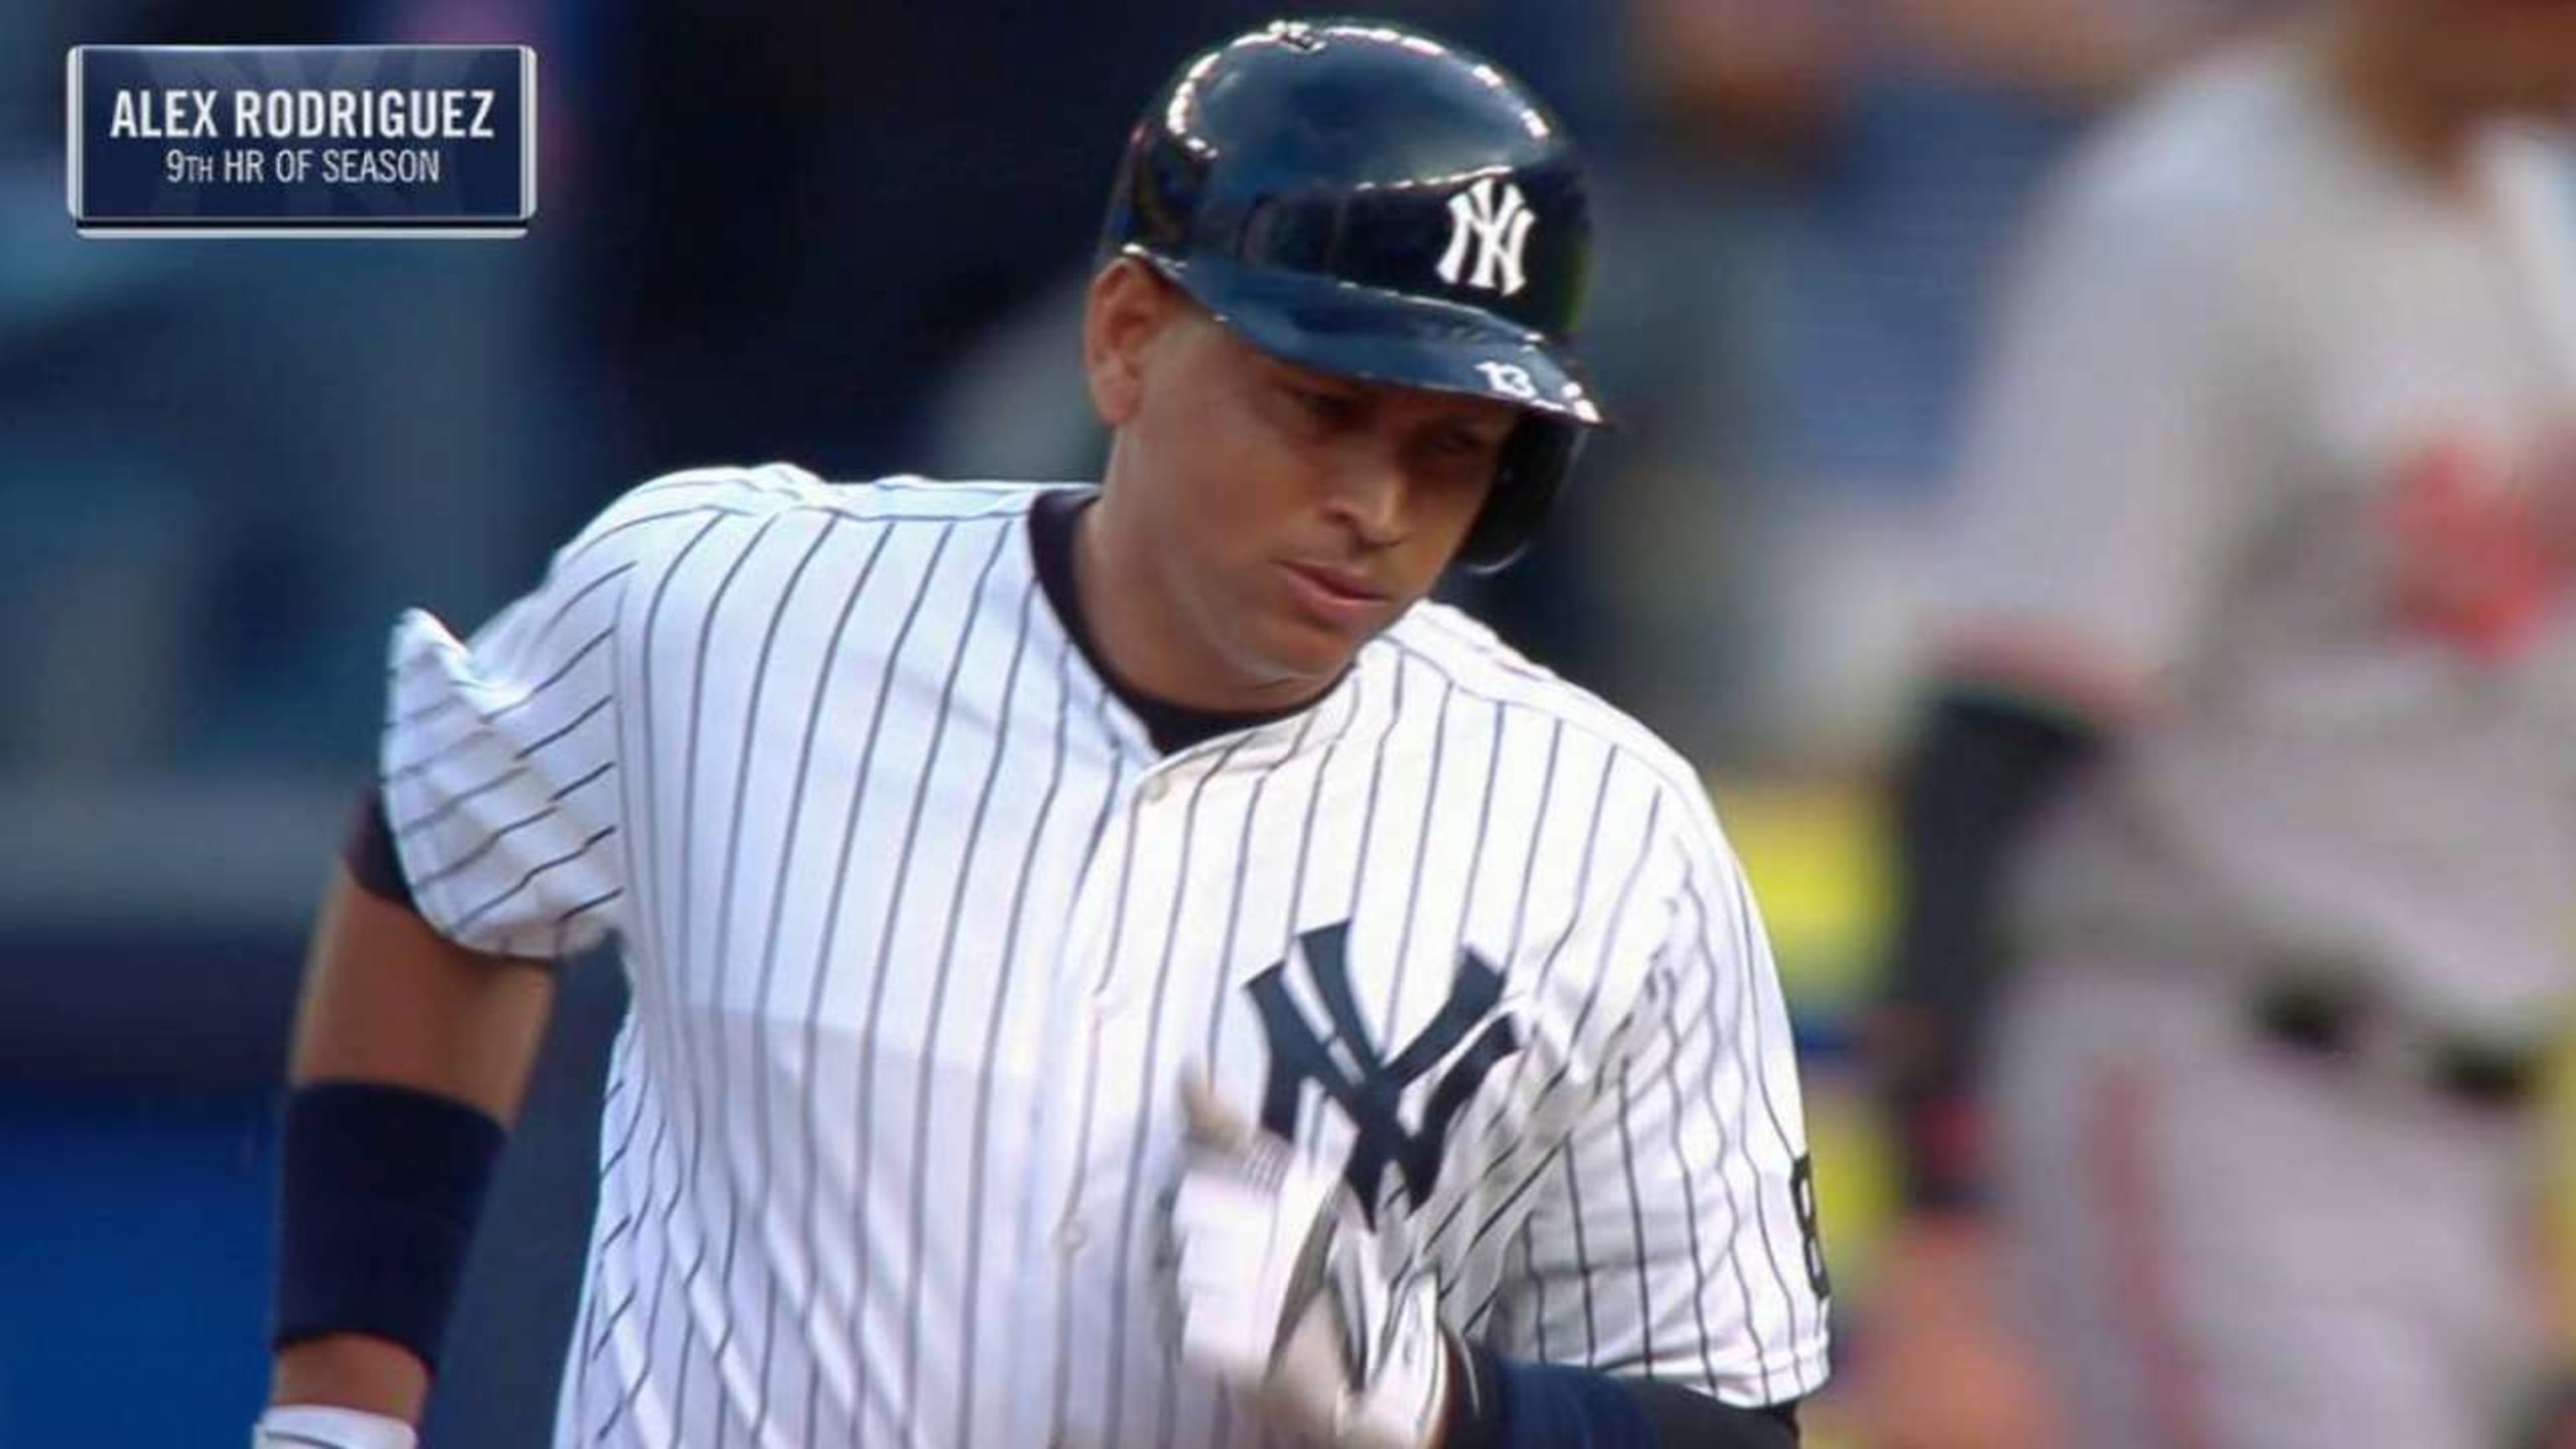 Alex Rodriguez Drama Is Hurting Baseball and the New York Yankees